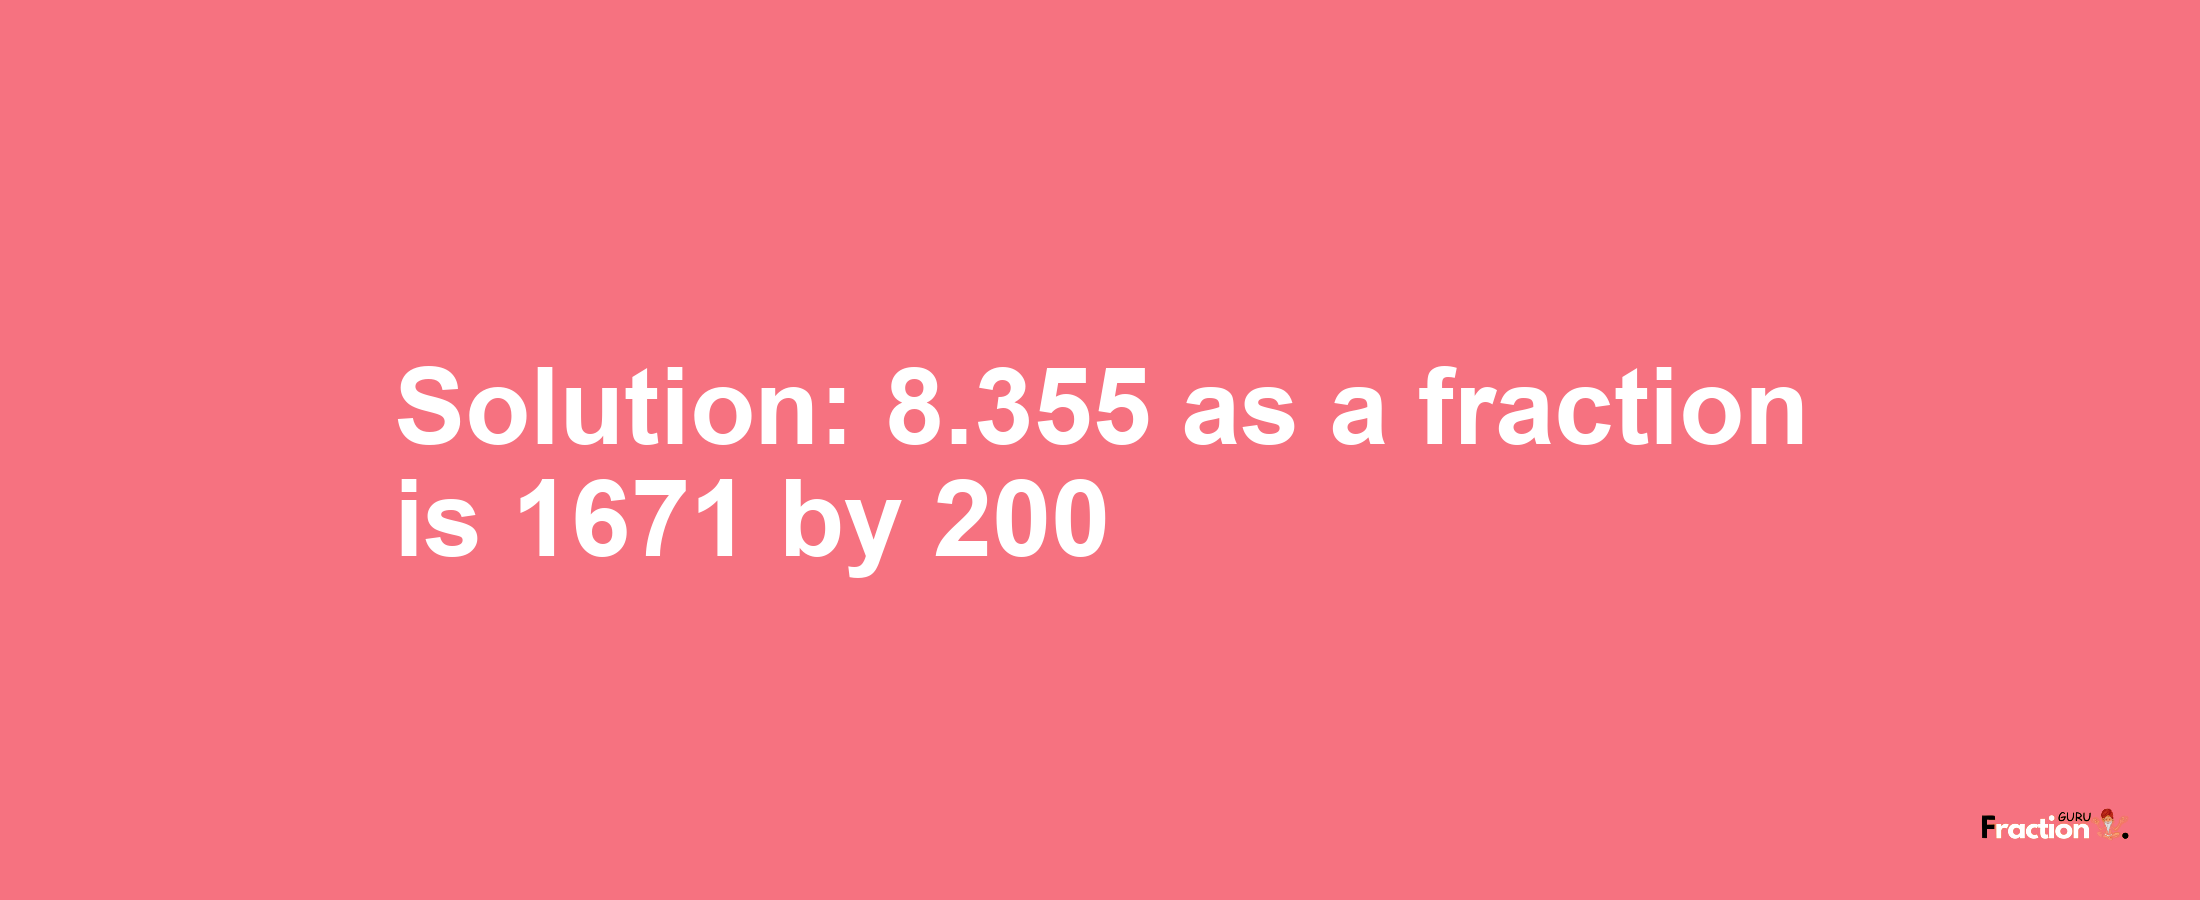 Solution:8.355 as a fraction is 1671/200